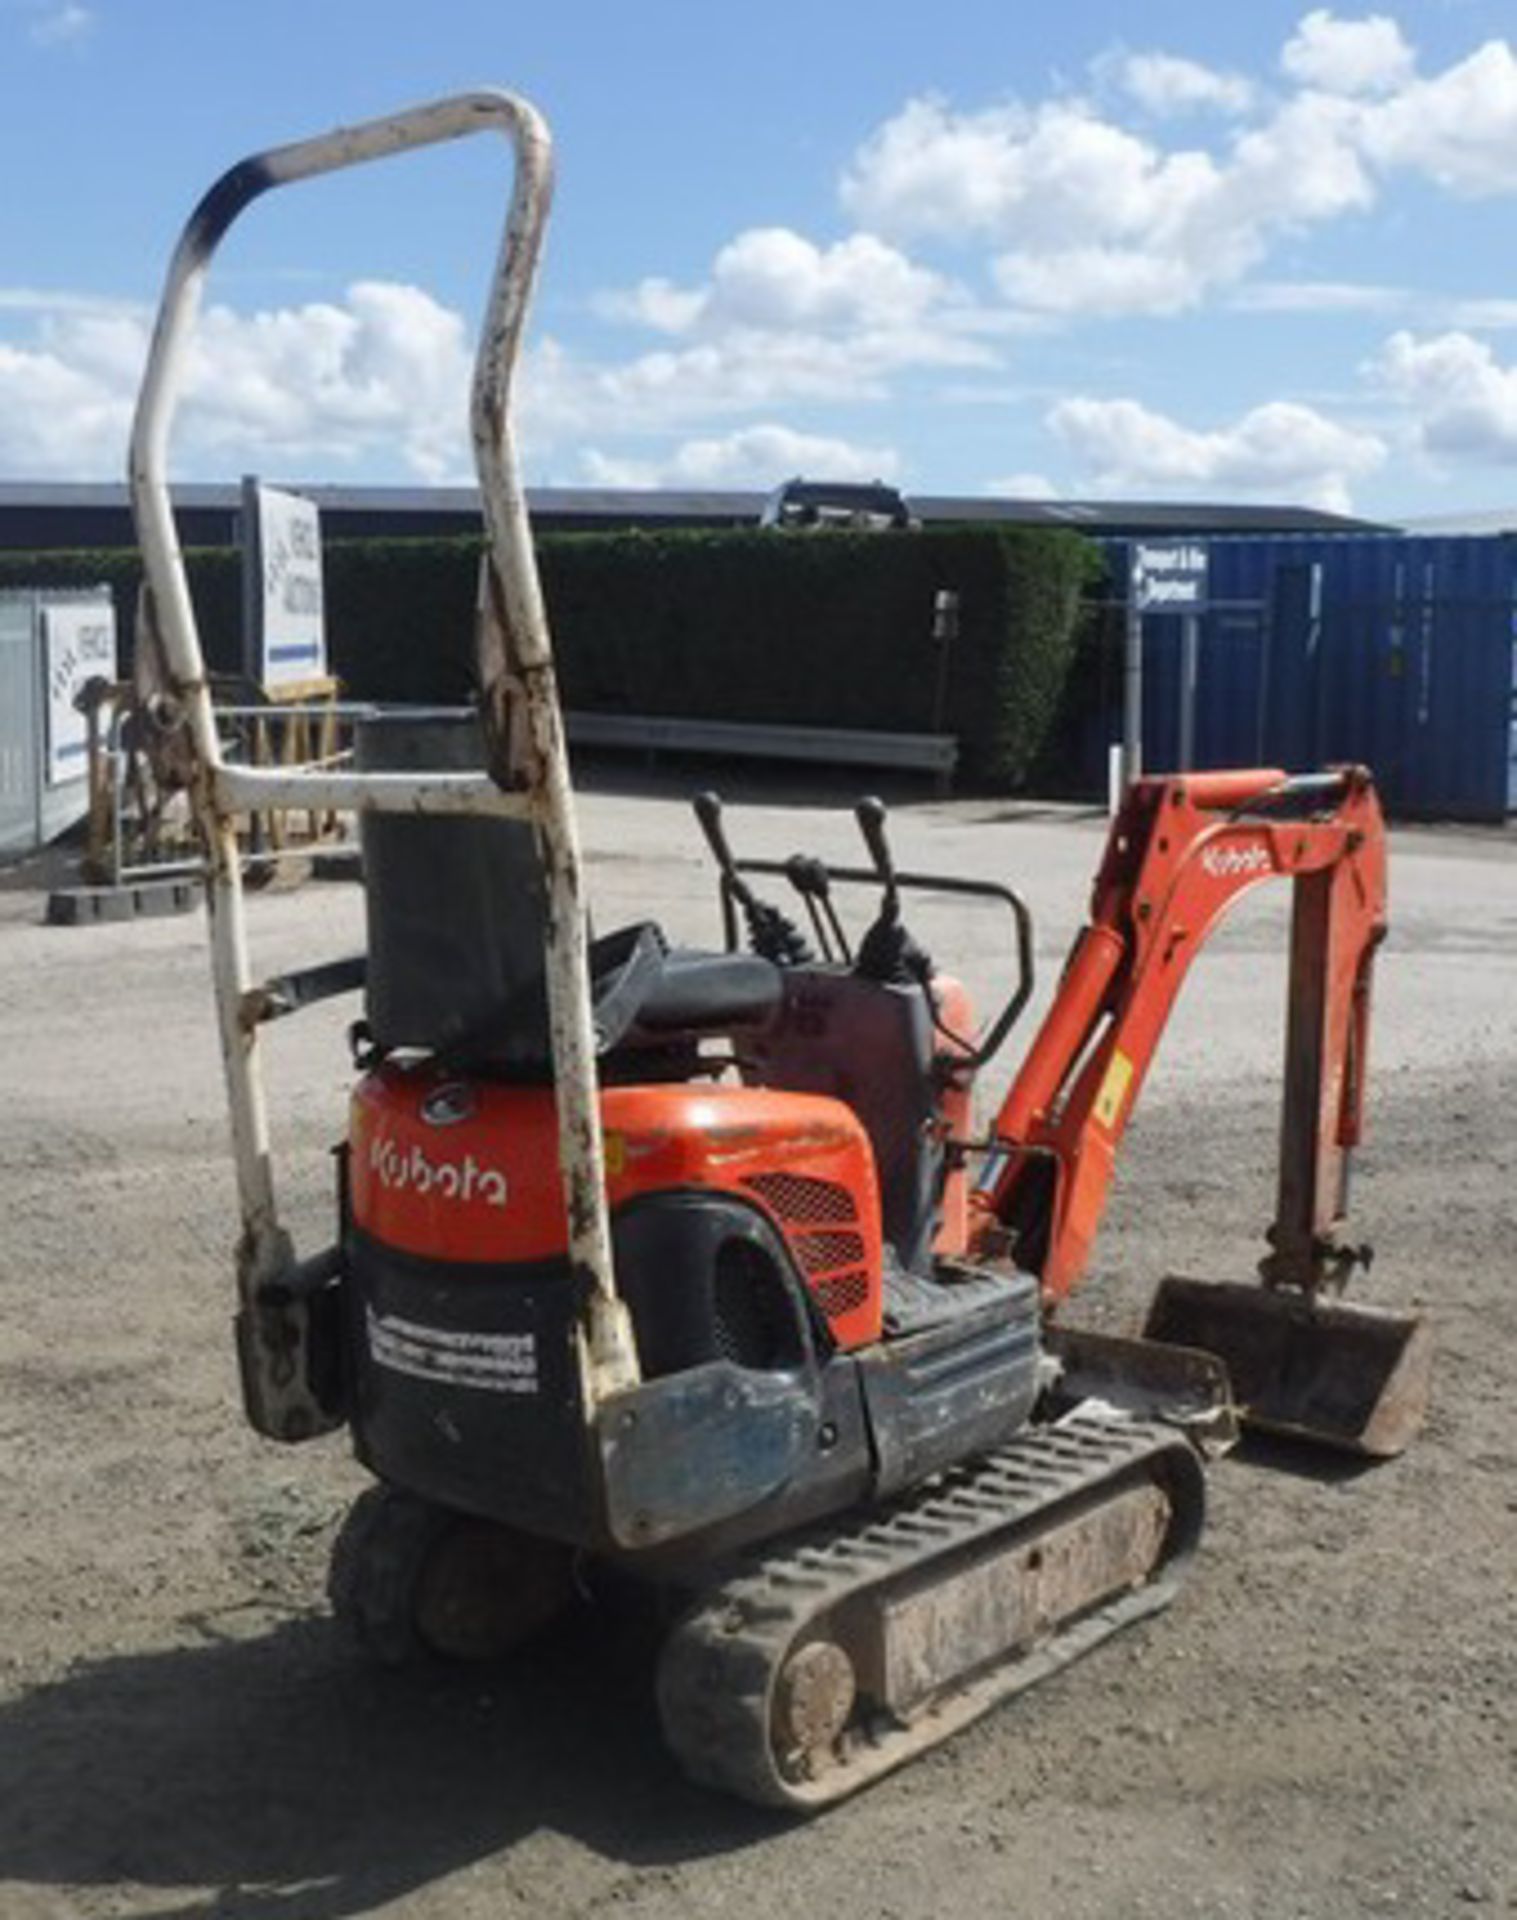 KUBOTA K008-3 ULTRA COMPACT EXCAVATOR C/W WITH BUCKET. SN12613. 3154 HRS. YEAR UNKNOWN - Image 5 of 18